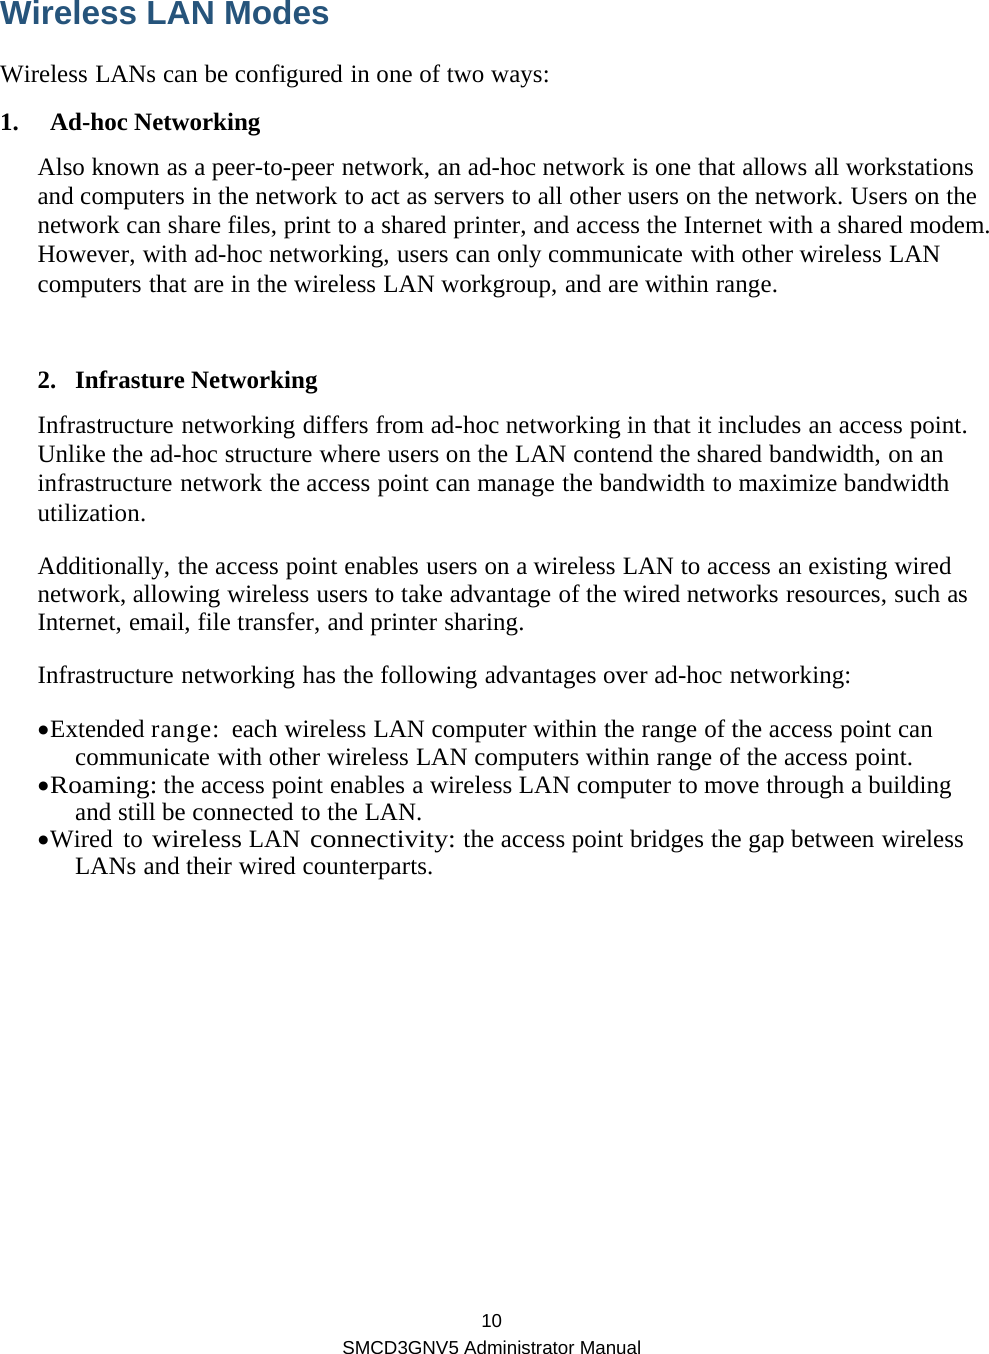  10 SMCD3GNV5 Administrator Manual Wireless LAN Modes   Wireless LANs can be configured in one of two ways: 1. Ad-hoc Networking Also known as a peer-to-peer network, an ad-hoc network is one that allows all workstations and computers in the network to act as servers to all other users on the network. Users on the network can share files, print to a shared printer, and access the Internet with a shared modem. However, with ad-hoc networking, users can only communicate with other wireless LAN computers that are in the wireless LAN workgroup, and are within range.  2. Infrasture Networking Infrastructure networking differs from ad-hoc networking in that it includes an access point. Unlike the ad-hoc structure where users on the LAN contend the shared bandwidth, on an infrastructure network the access point can manage the bandwidth to maximize bandwidth utilization. Additionally, the access point enables users on a wireless LAN to access an existing wired network, allowing wireless users to take advantage of the wired networks resources, such as Internet, email, file transfer, and printer sharing. Infrastructure networking has the following advantages over ad-hoc networking: • Extended range:  each wireless LAN computer within the range of the access point can communicate with other wireless LAN computers within range of the access point. • Roaming: the access point enables a wireless LAN computer to move through a building and still be connected to the LAN. • Wired to wireless LAN connectivity: the access point bridges the gap between wireless LANs and their wired counterparts.       